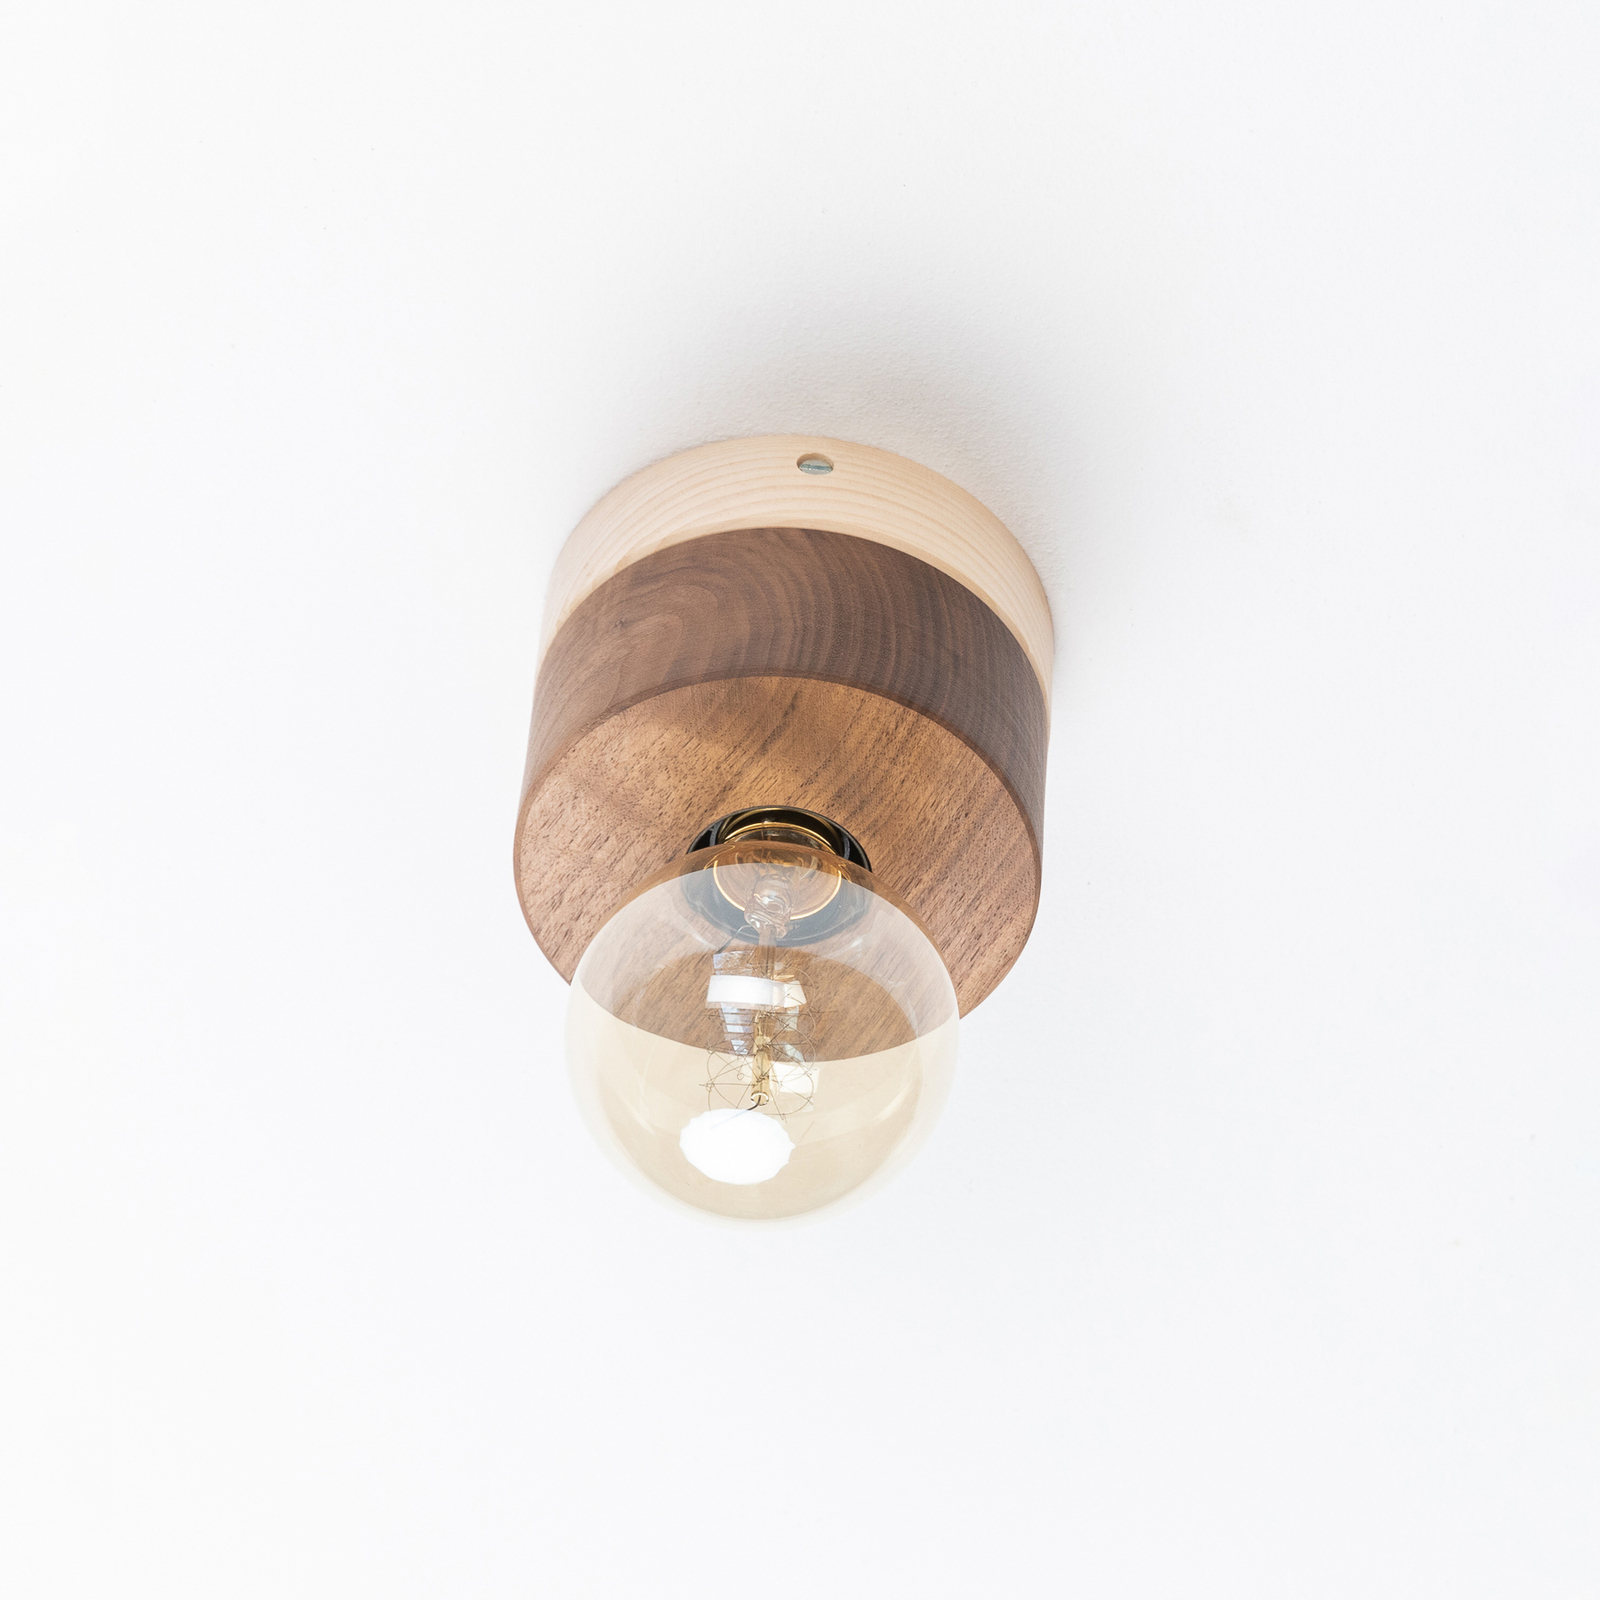 ALMUT 0239 ceiling lamp, sustainable, walnut/pine